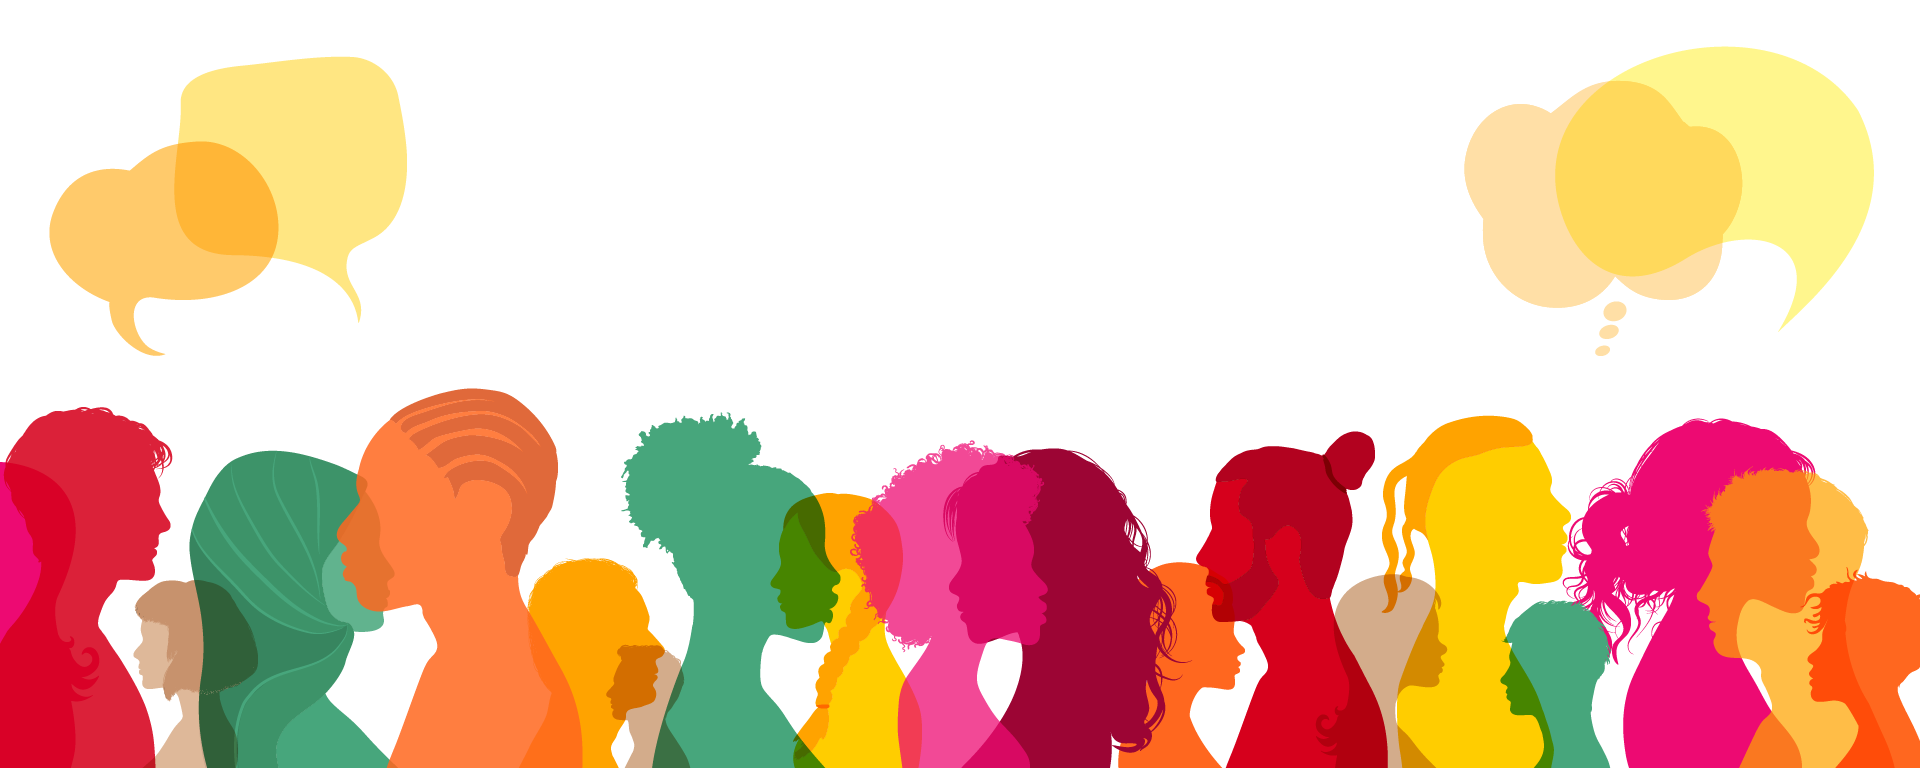 White background with coloured silhouettes of diverse people